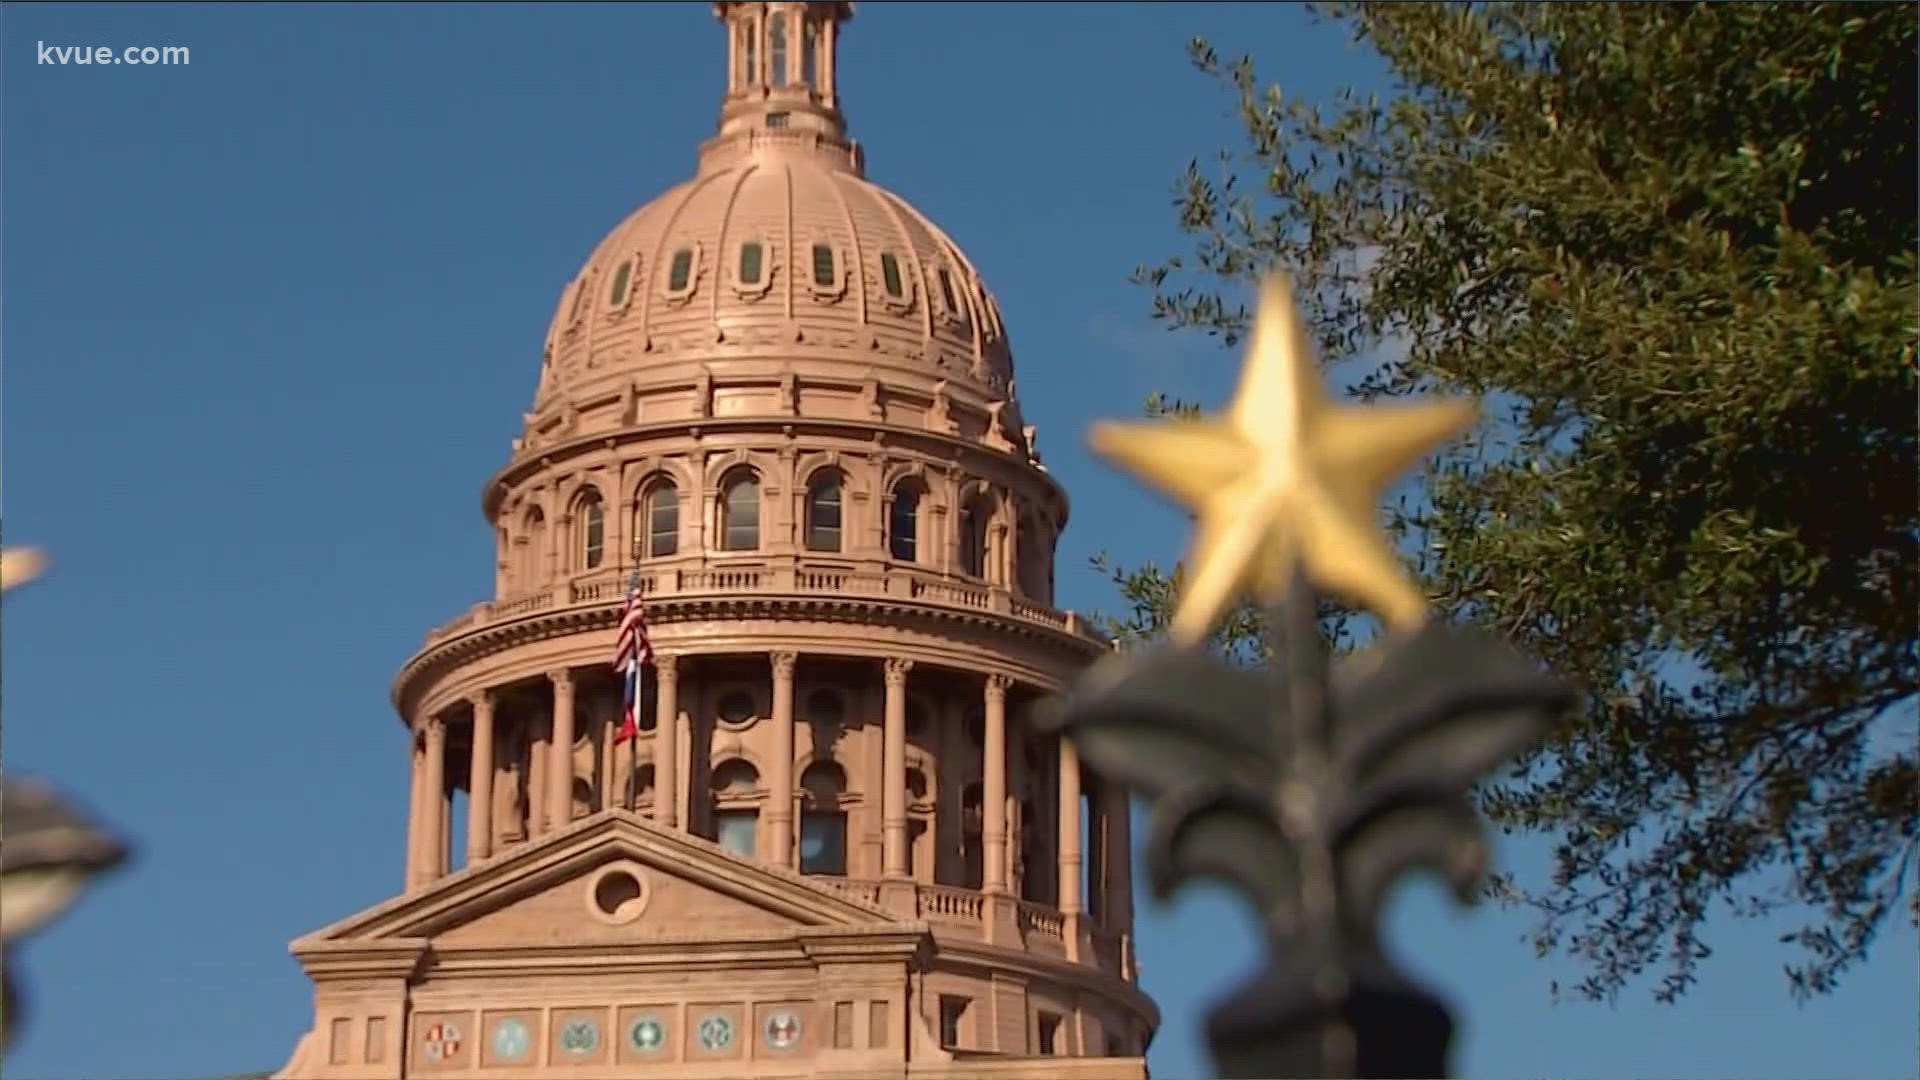 The Texas Legislature will meet once again for another special session, starting on Monday.